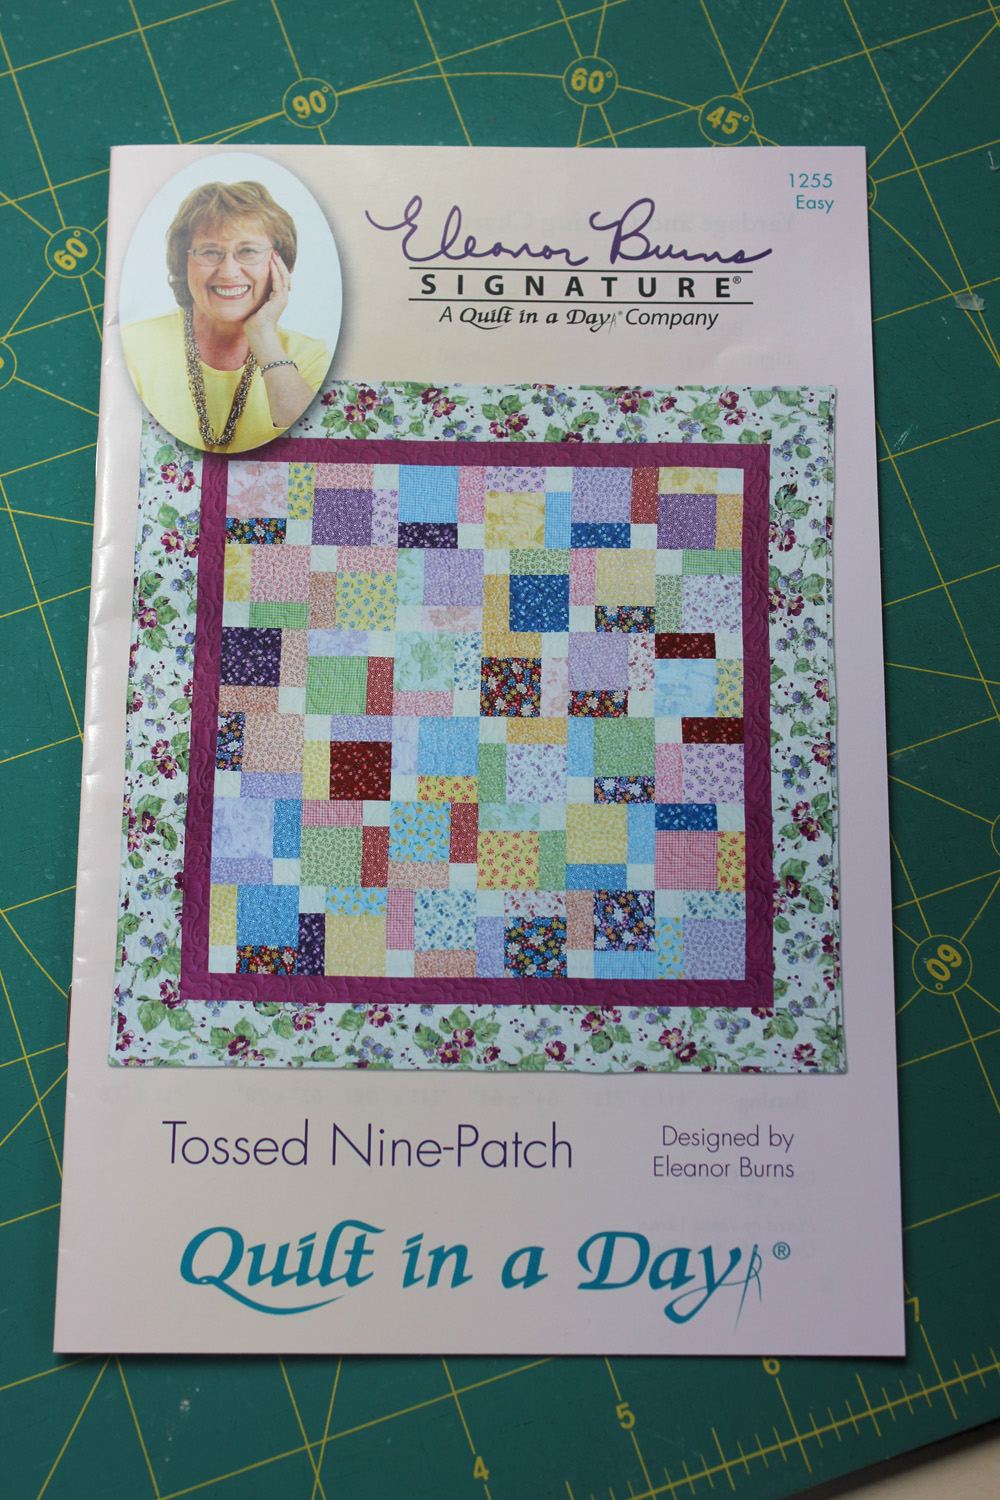 Beginner Tips: Working with Quilt Patternsarticle featured image thumbnail.